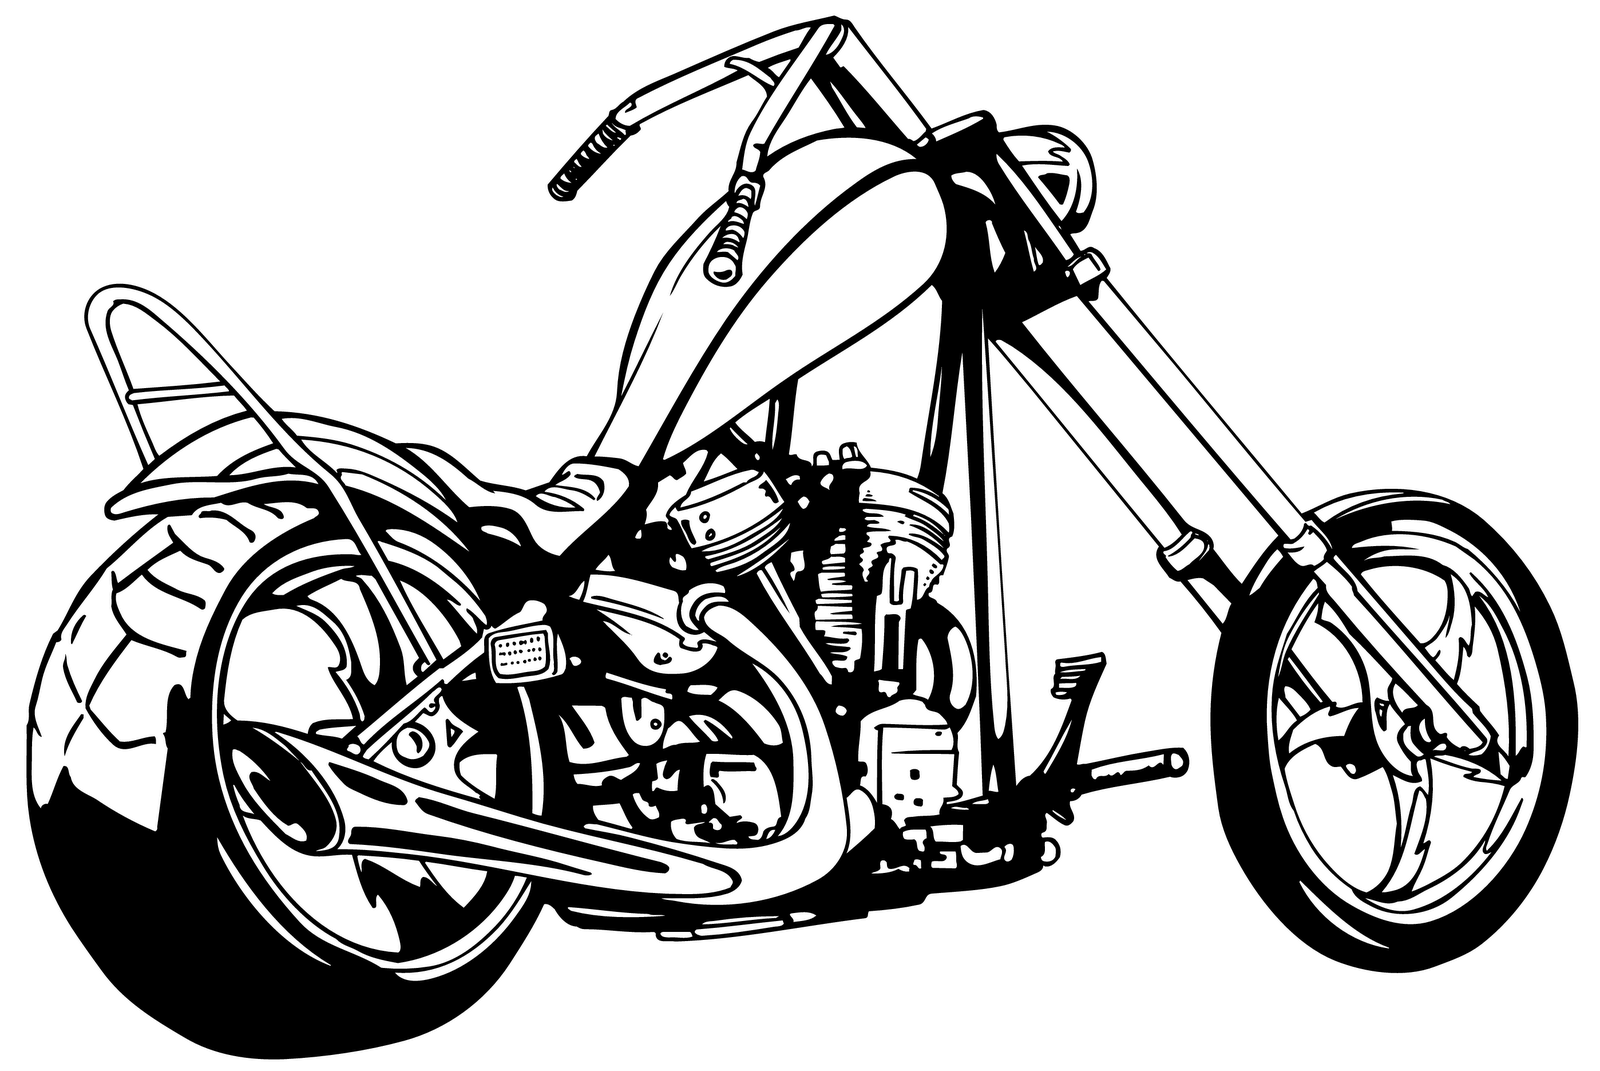 Motorcycle silhouette free clipart clipart kid